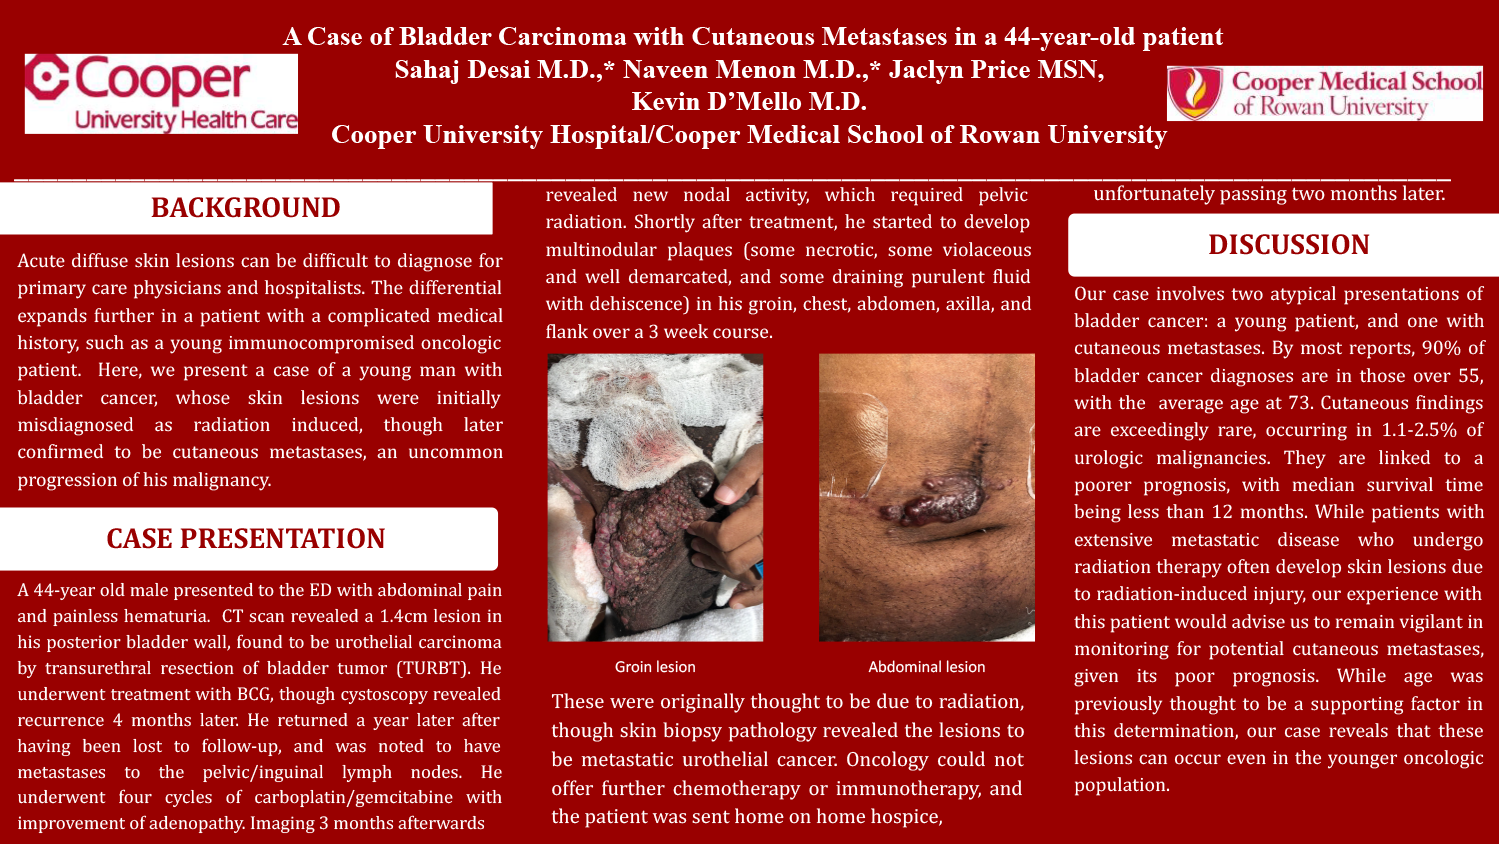 Sahaj Desai - PAS-2-A-Case-of-Bladder-Carcinoma-in-a-44-year-old-patient-with-Cutaneous-Metastases